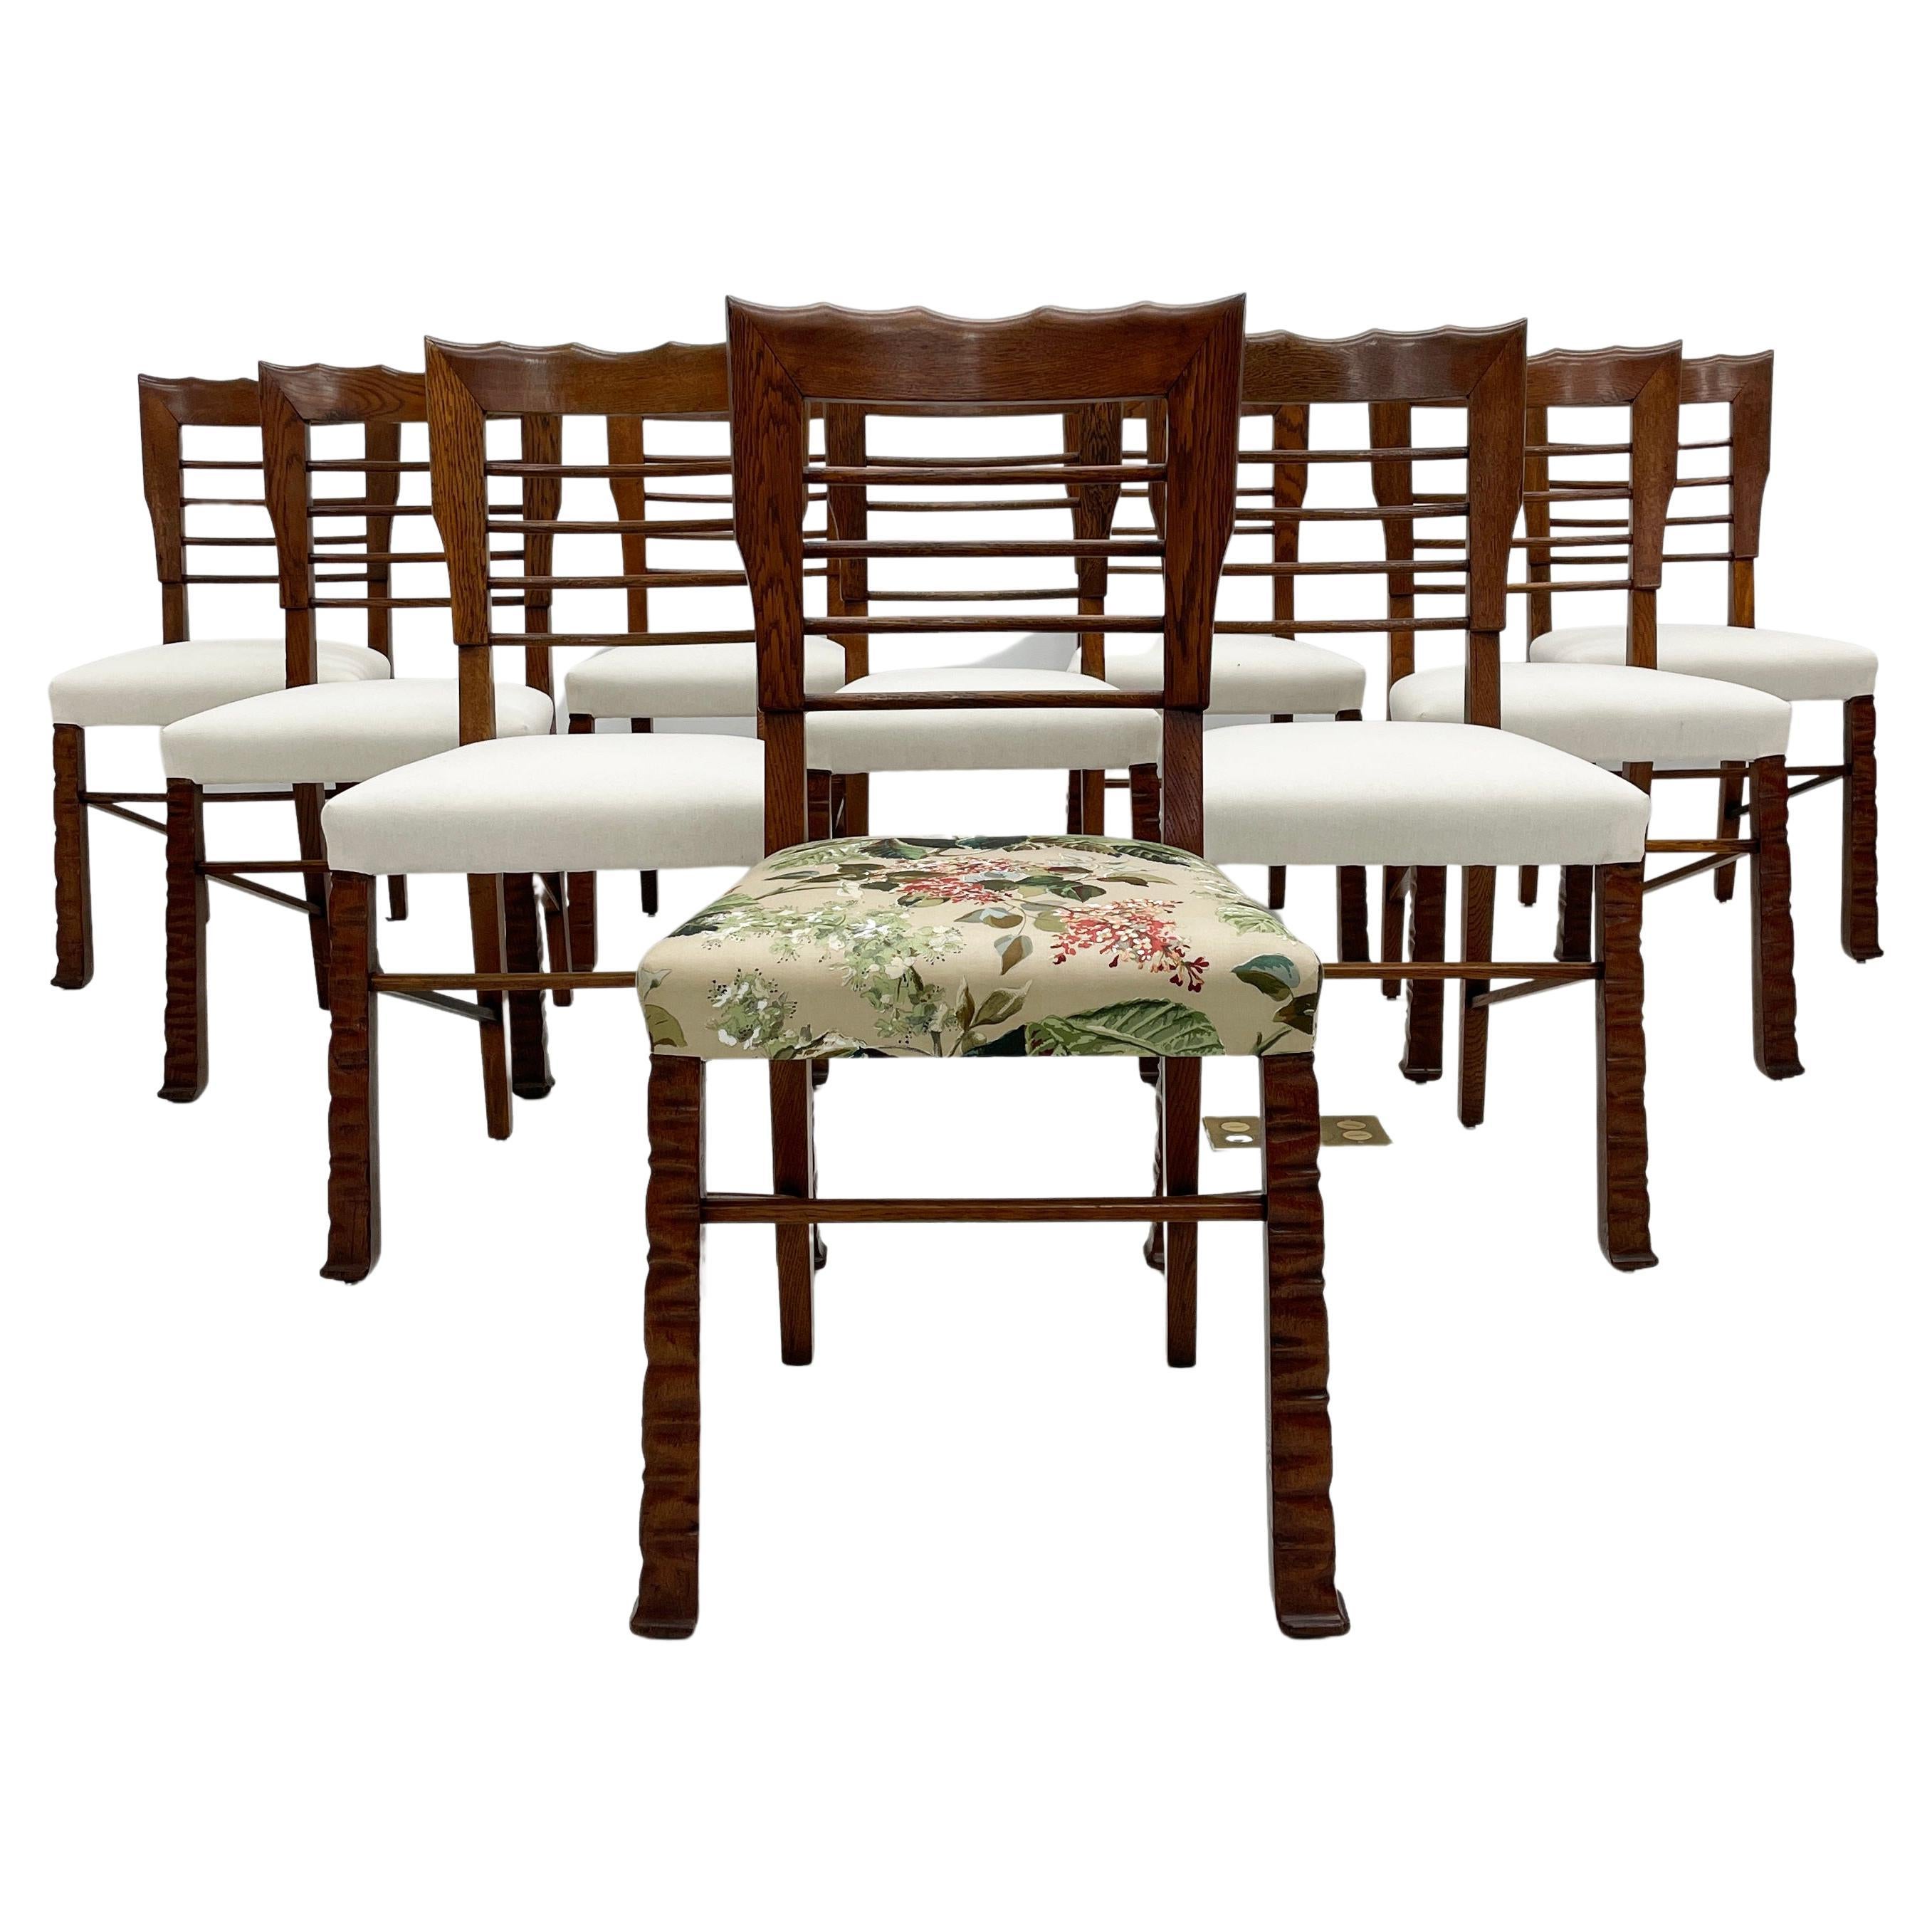 Rustic Scalloped Edge Dining Chairs, Set of 10, Italy, 1940's For Sale